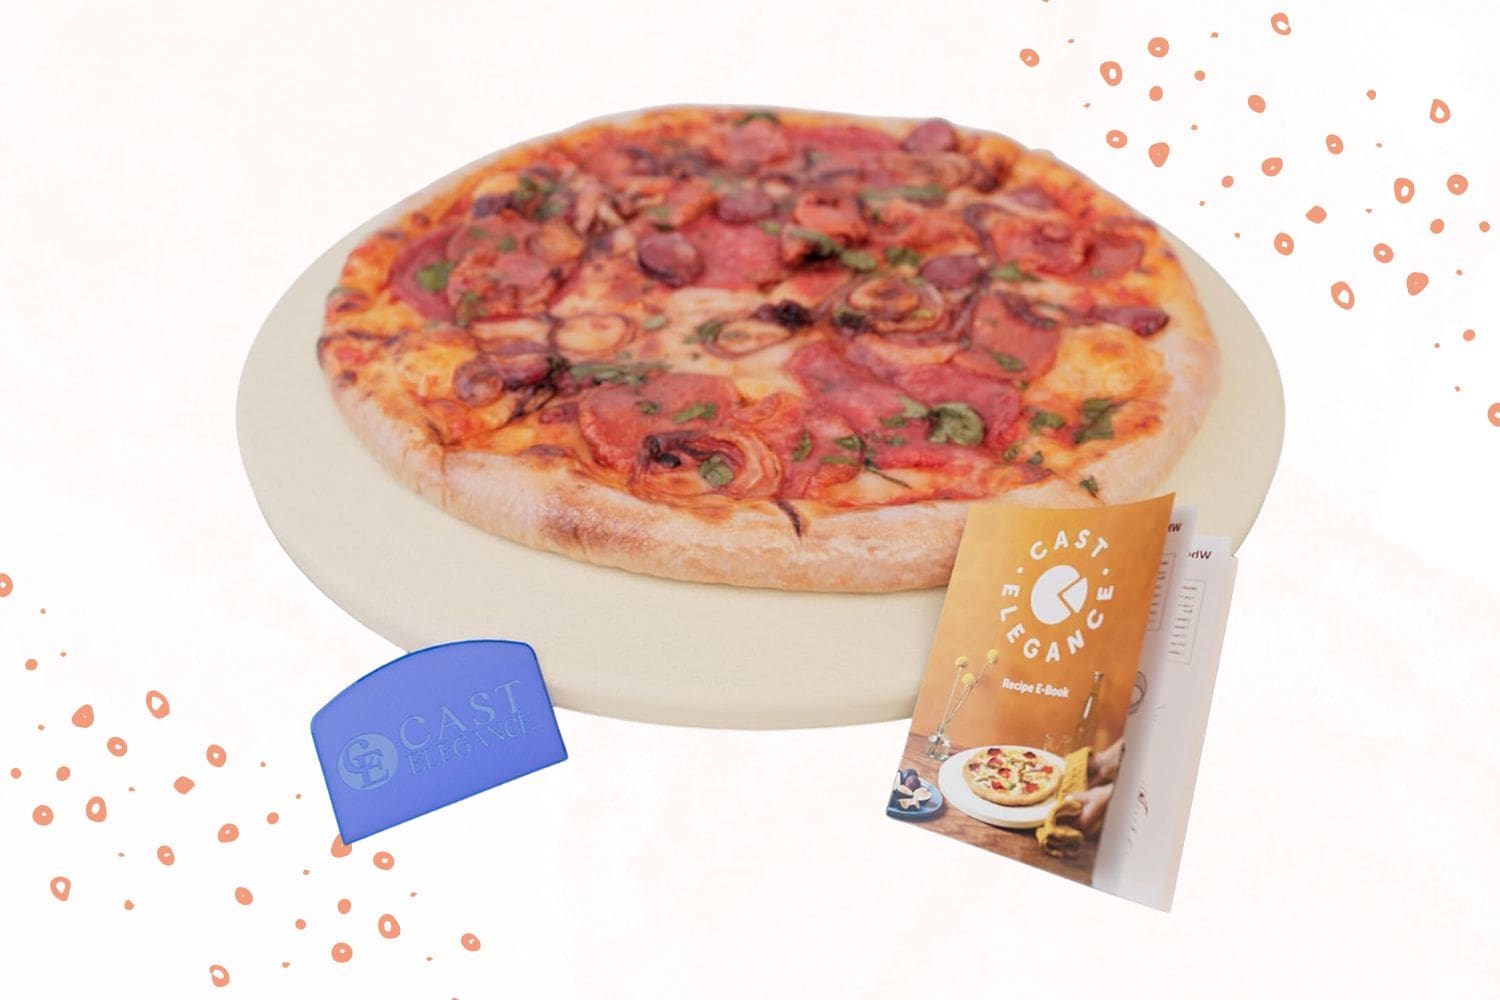 Cast Elegance's Durable Thermal Shock Resistant Thermarite Pizza and Baking Stone